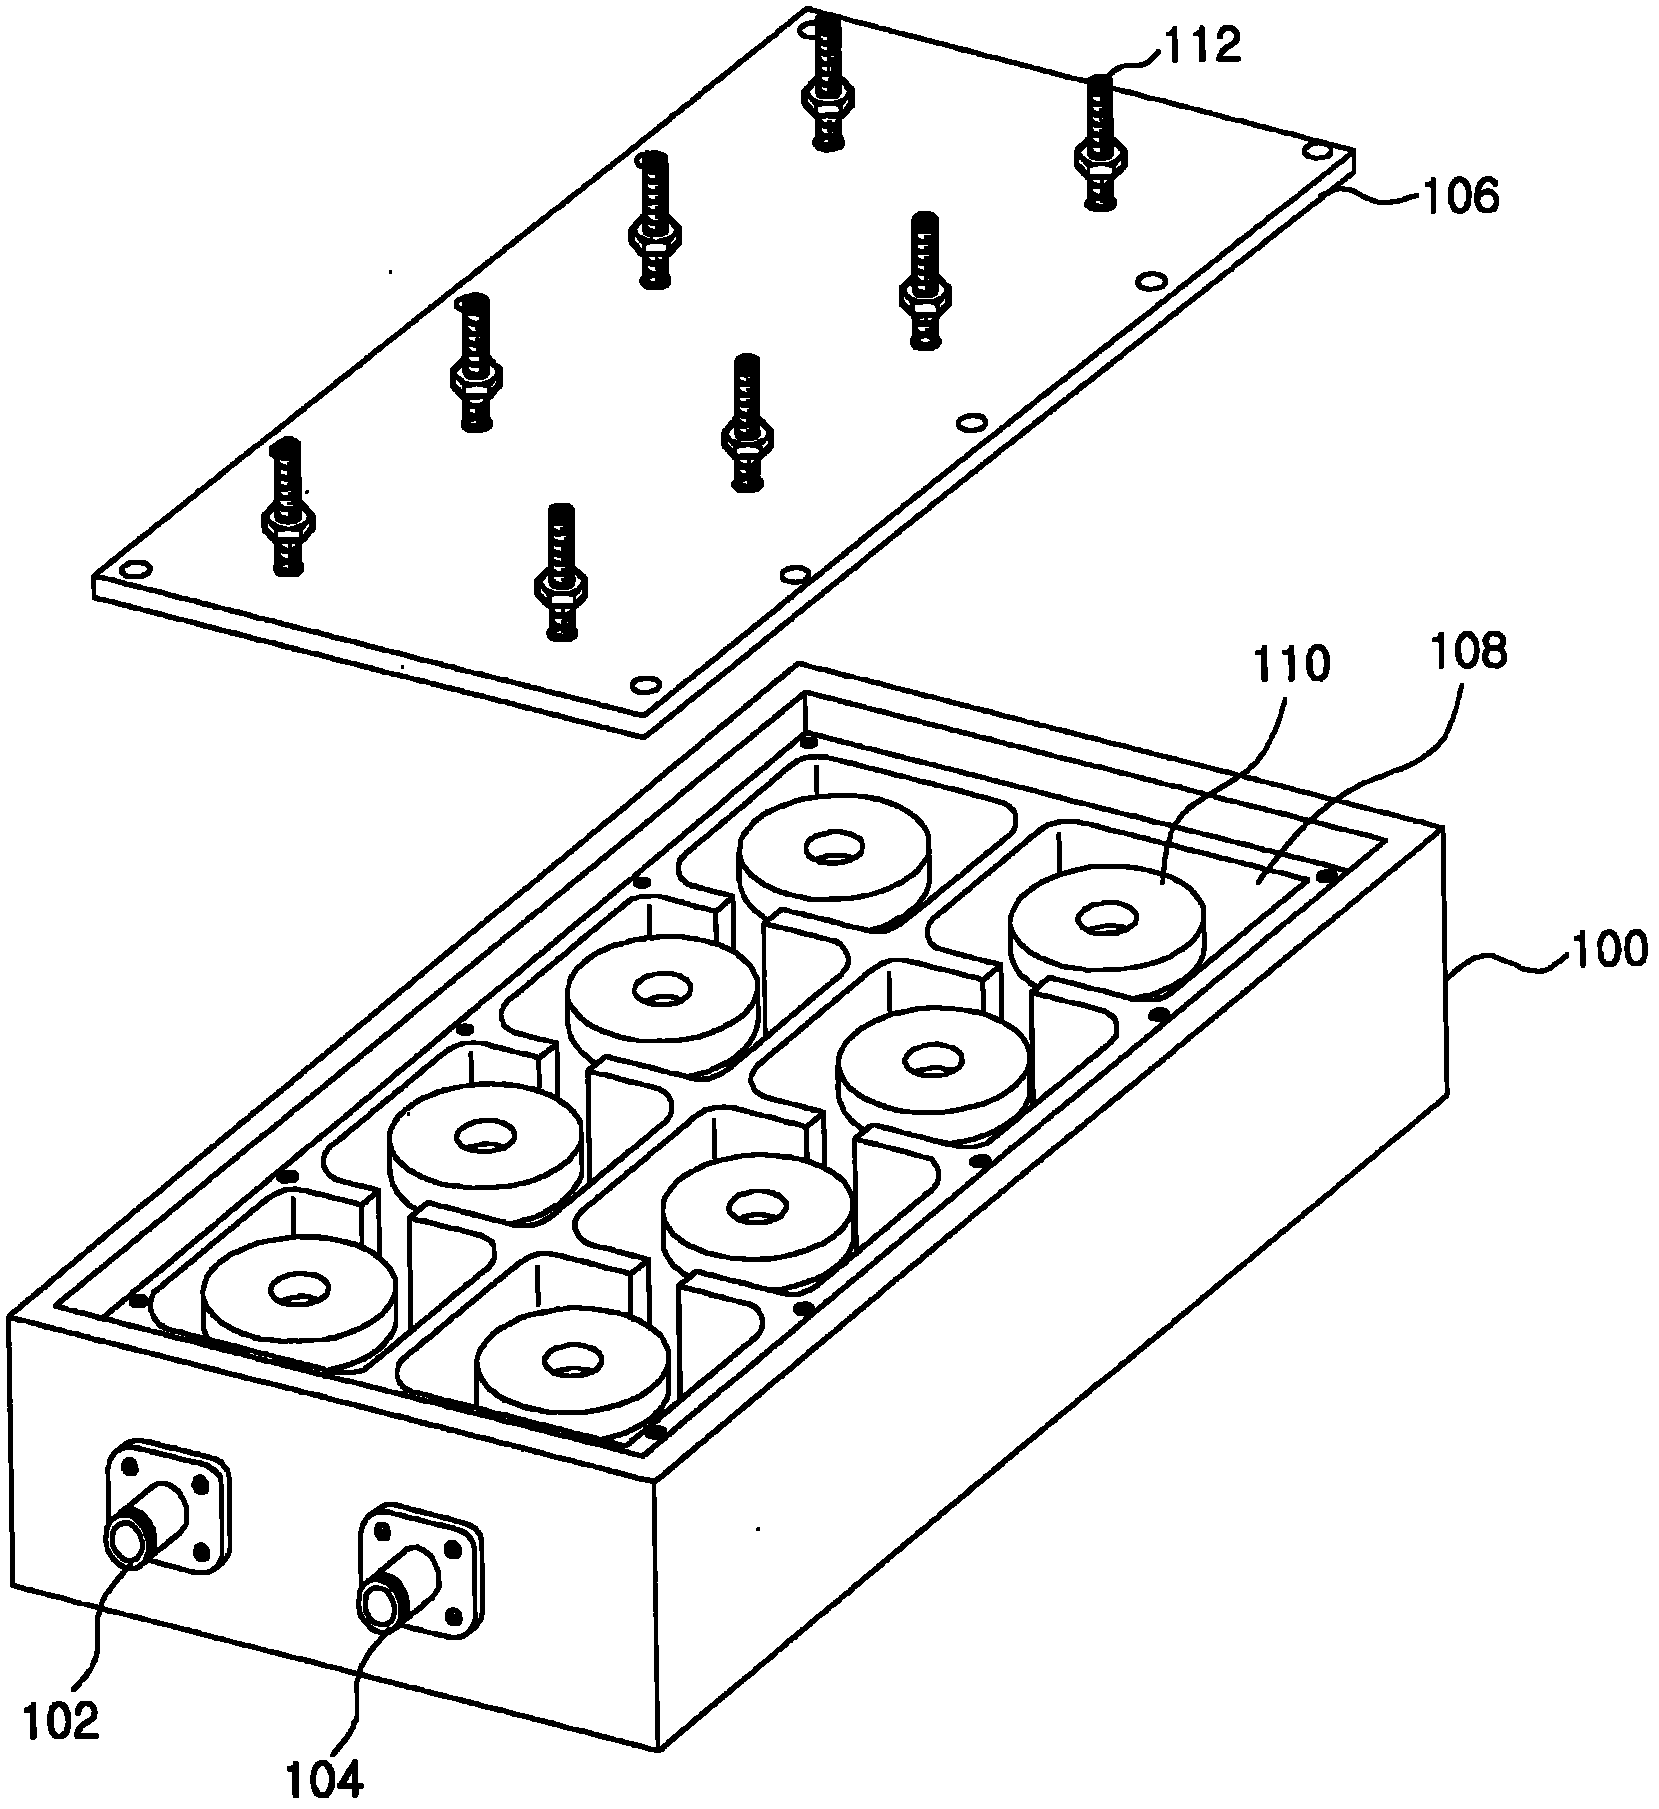 Tunable filter for expanding the tuning range